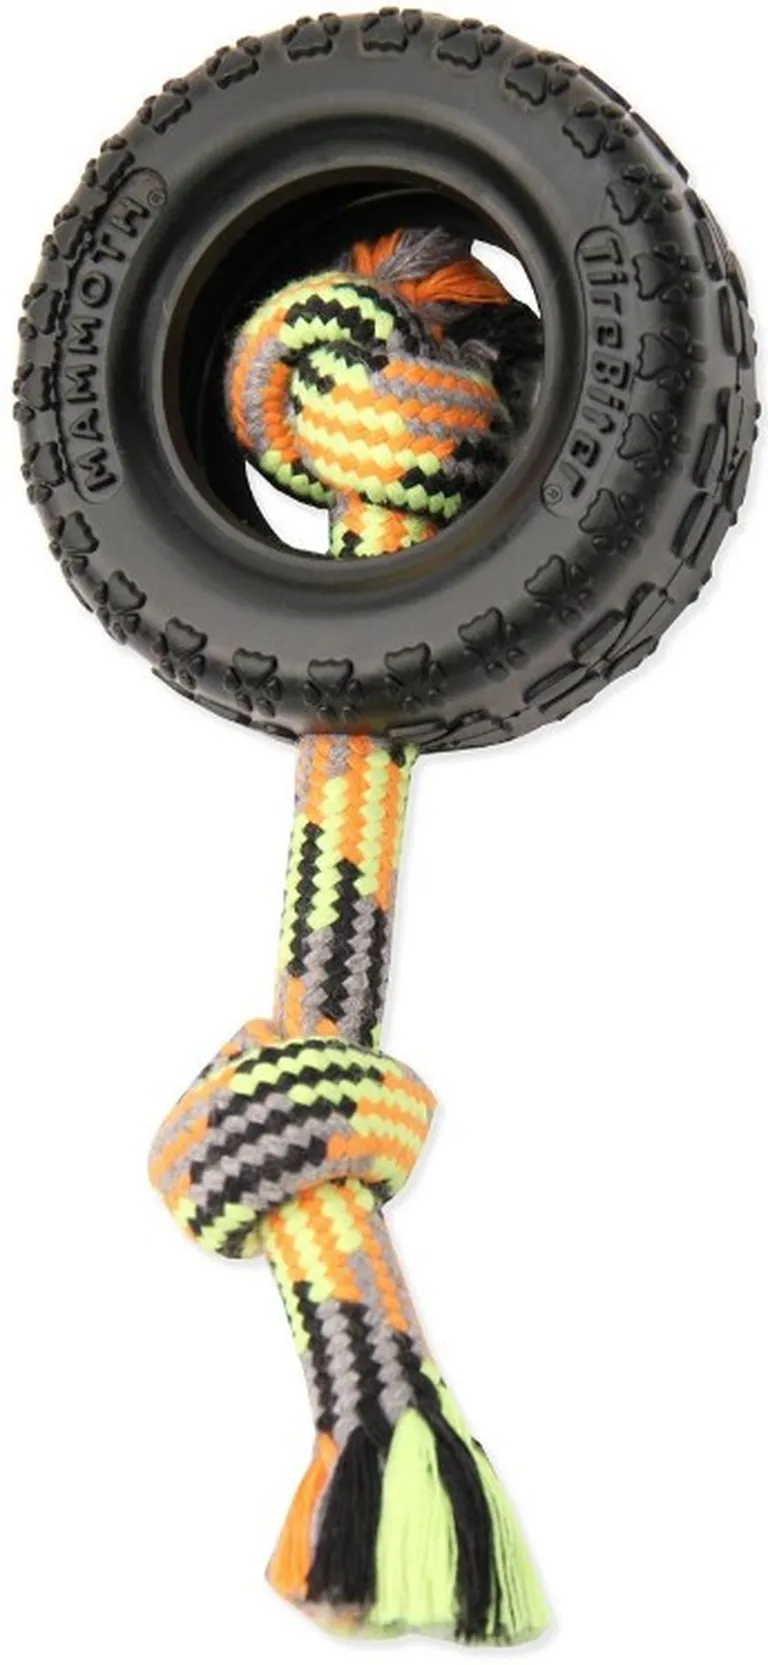 Mammoth Pet Tire Biter II Dog Toy with Rope Photo 1